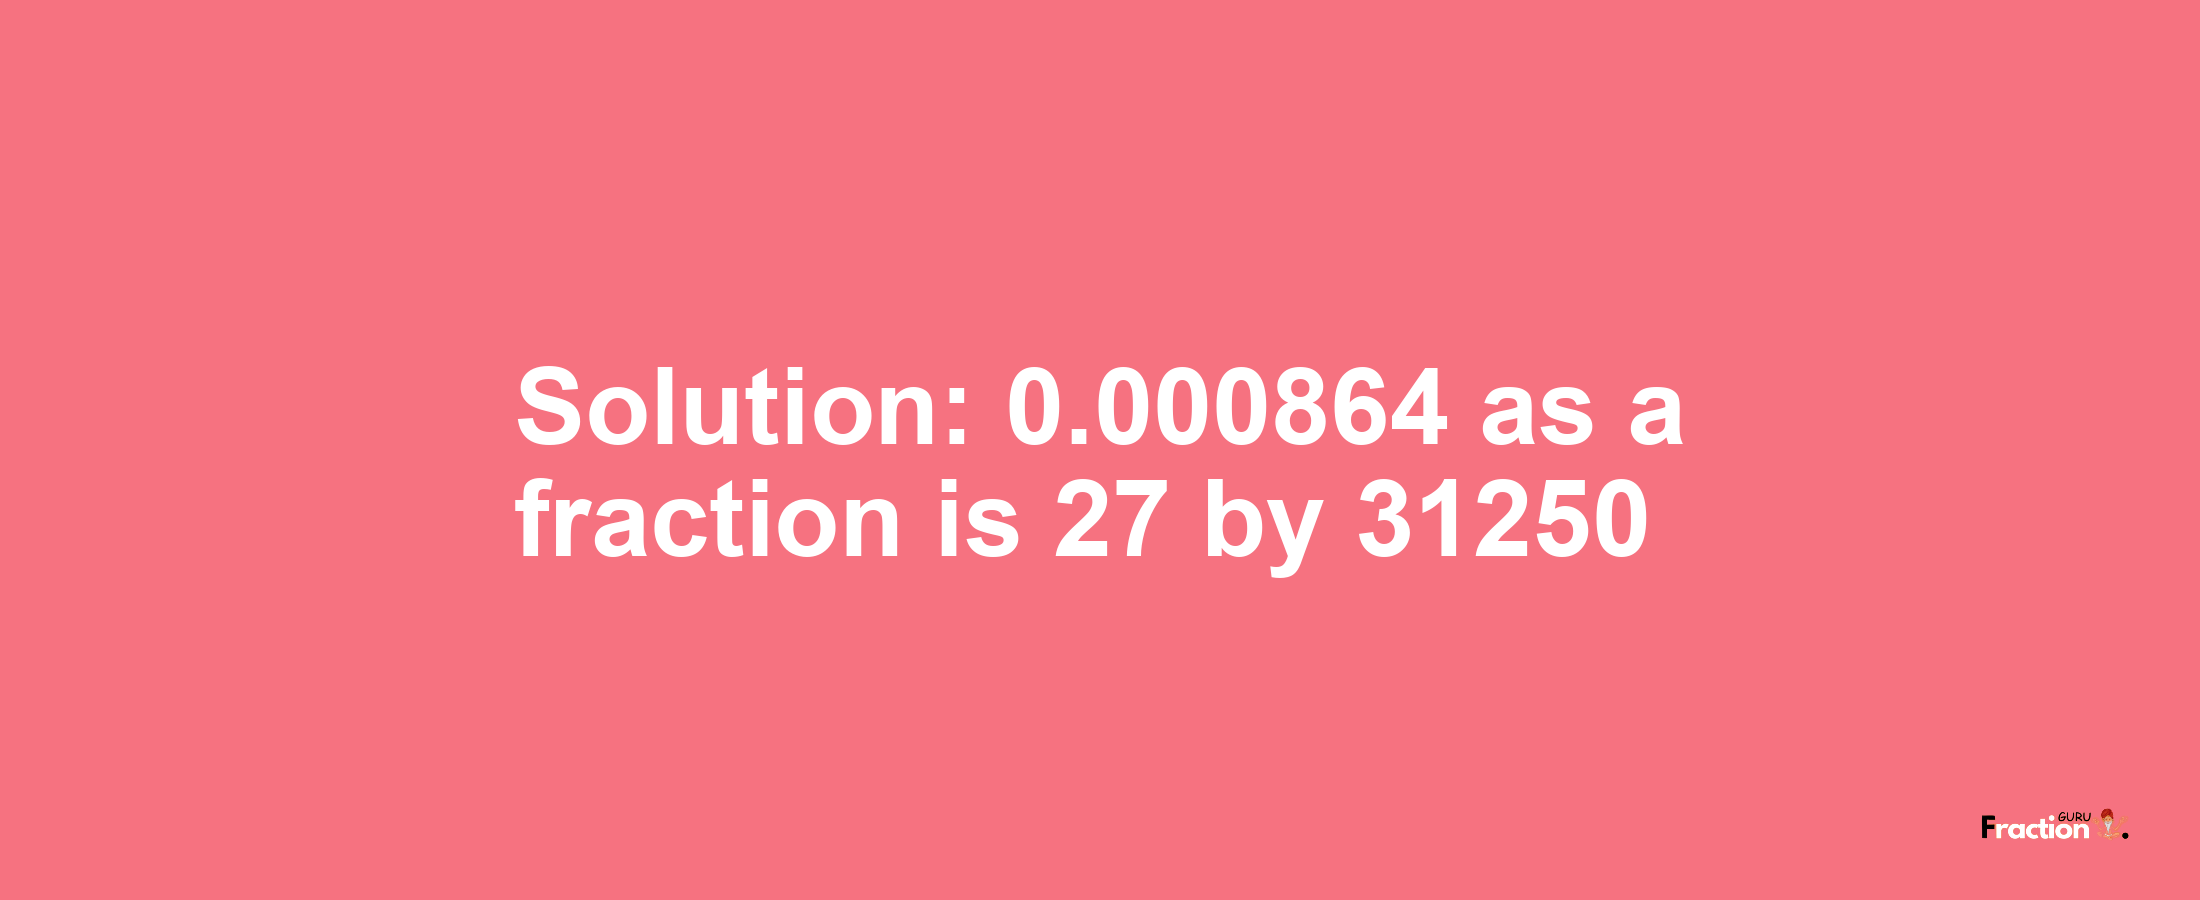 Solution:0.000864 as a fraction is 27/31250